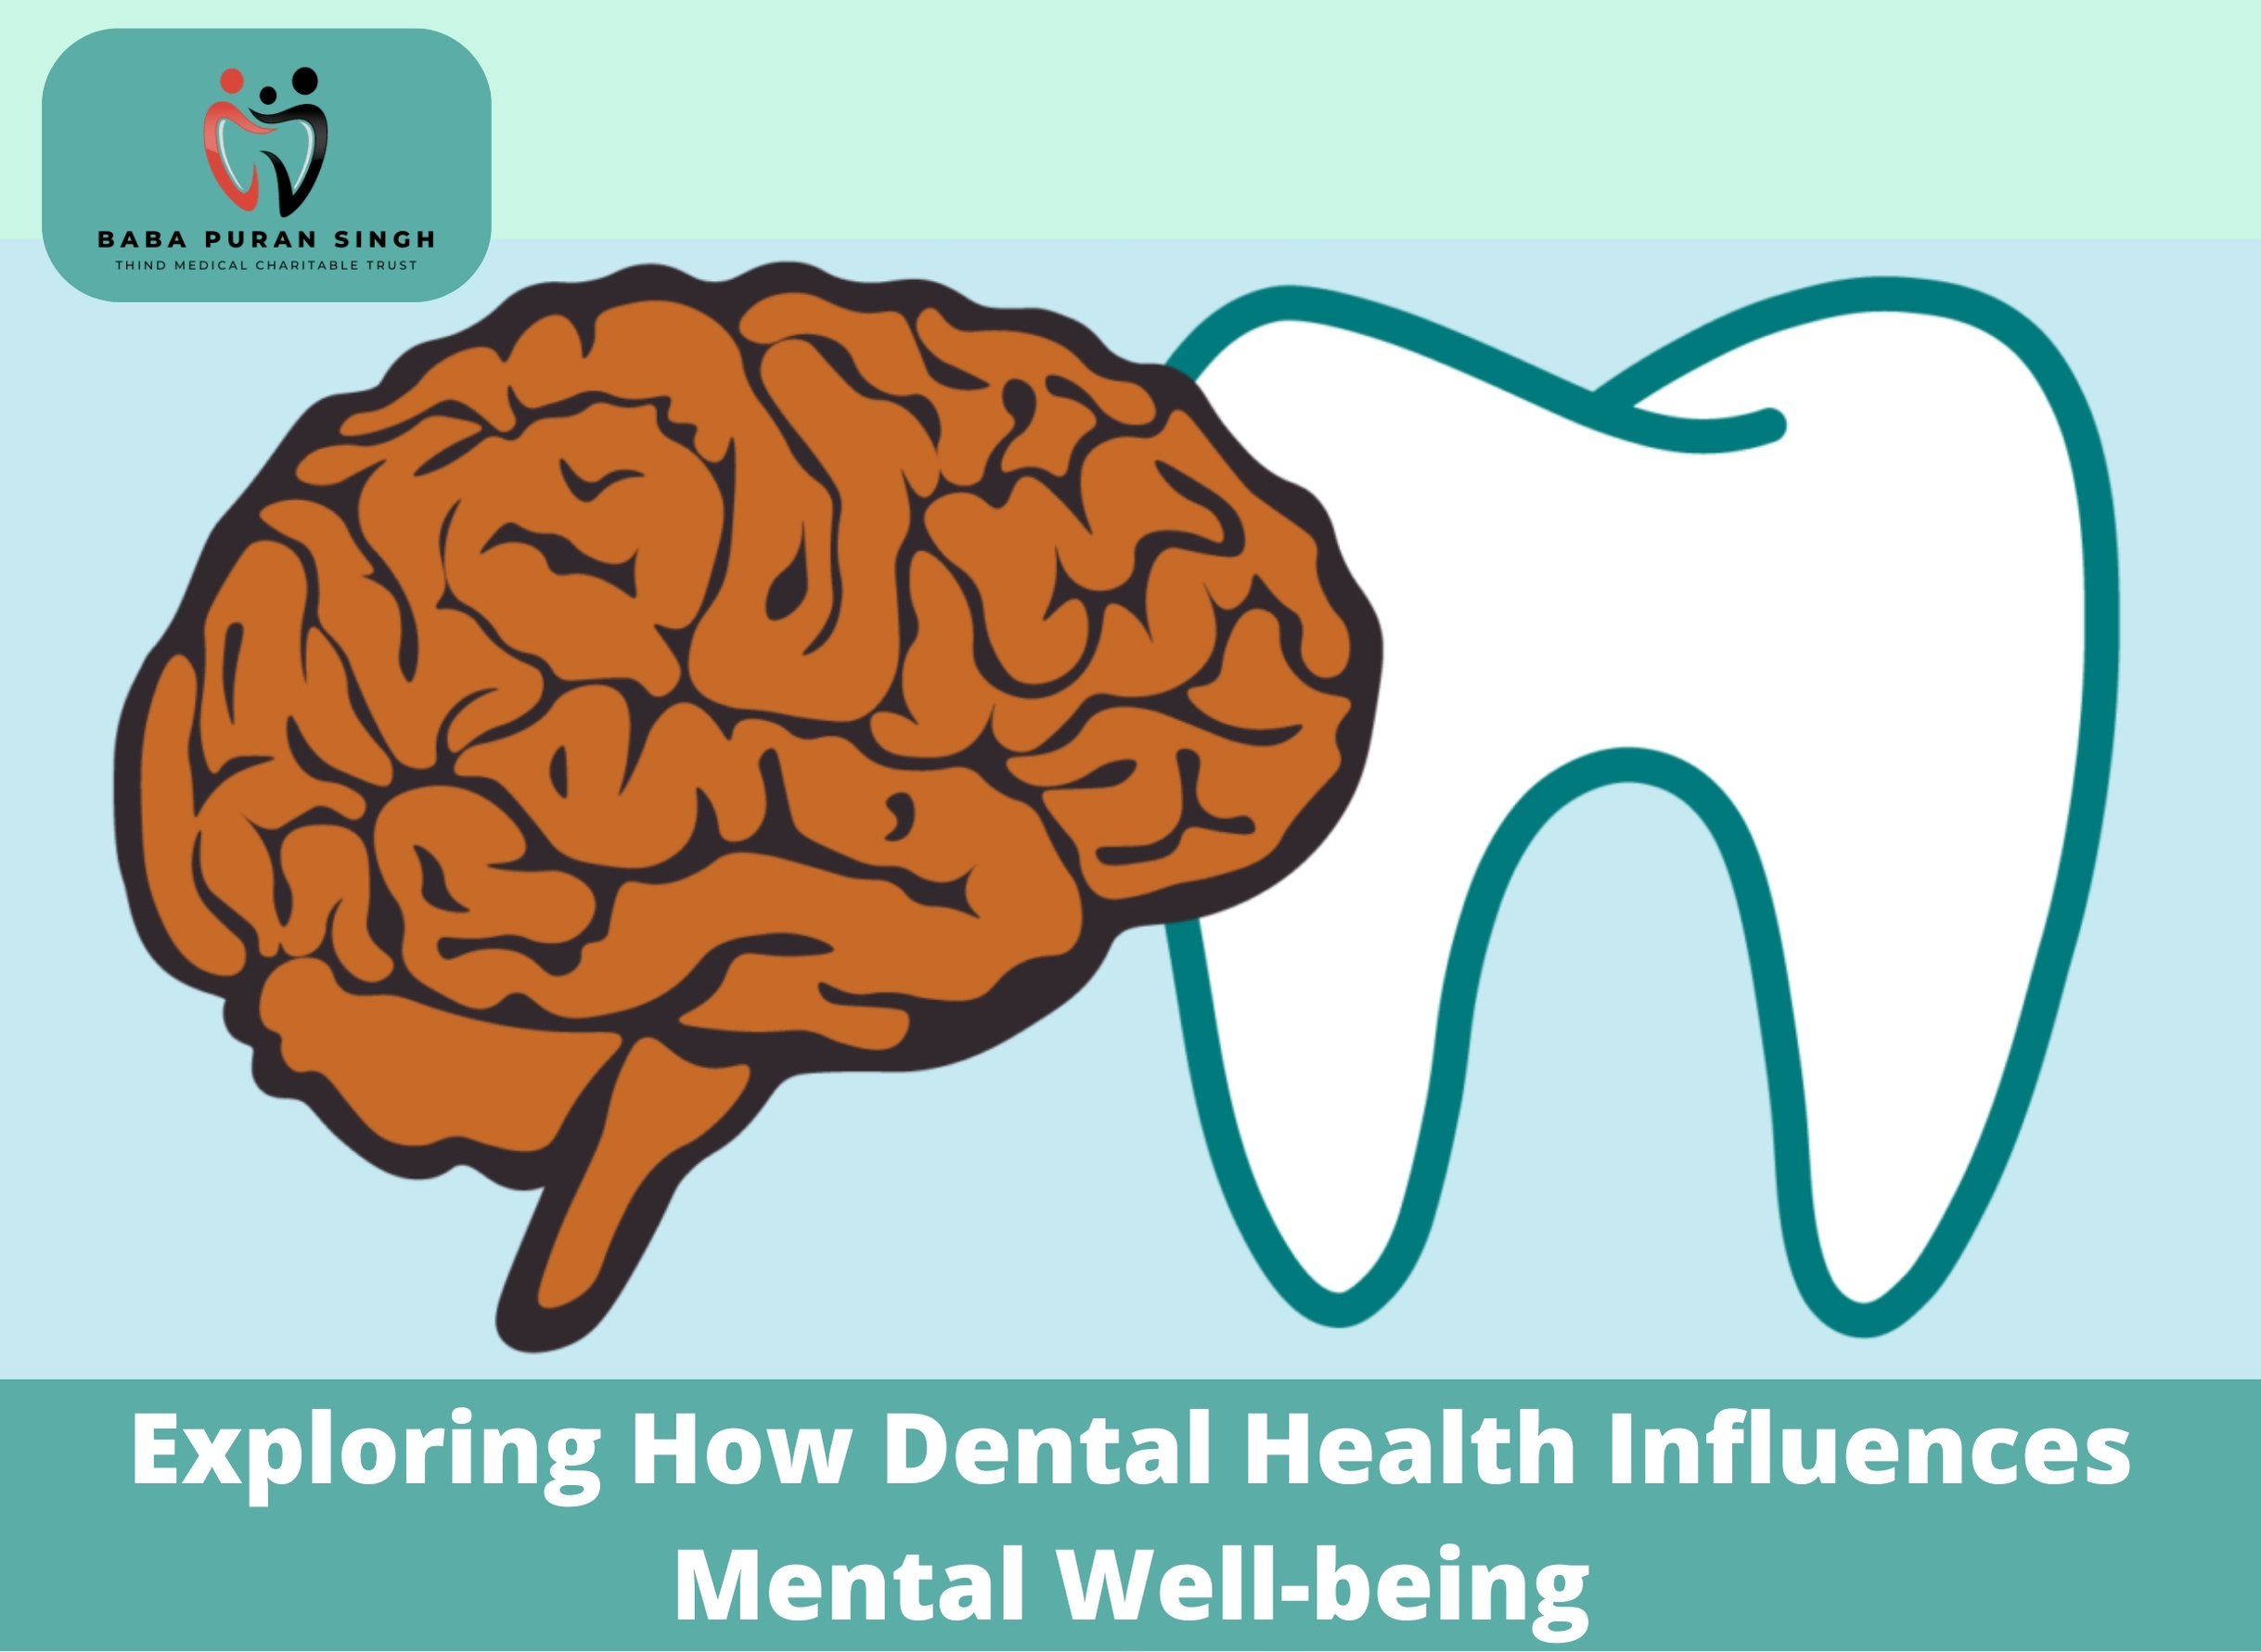 Exploring How Dental Health Influences Mental Well-being with BPSTMCT